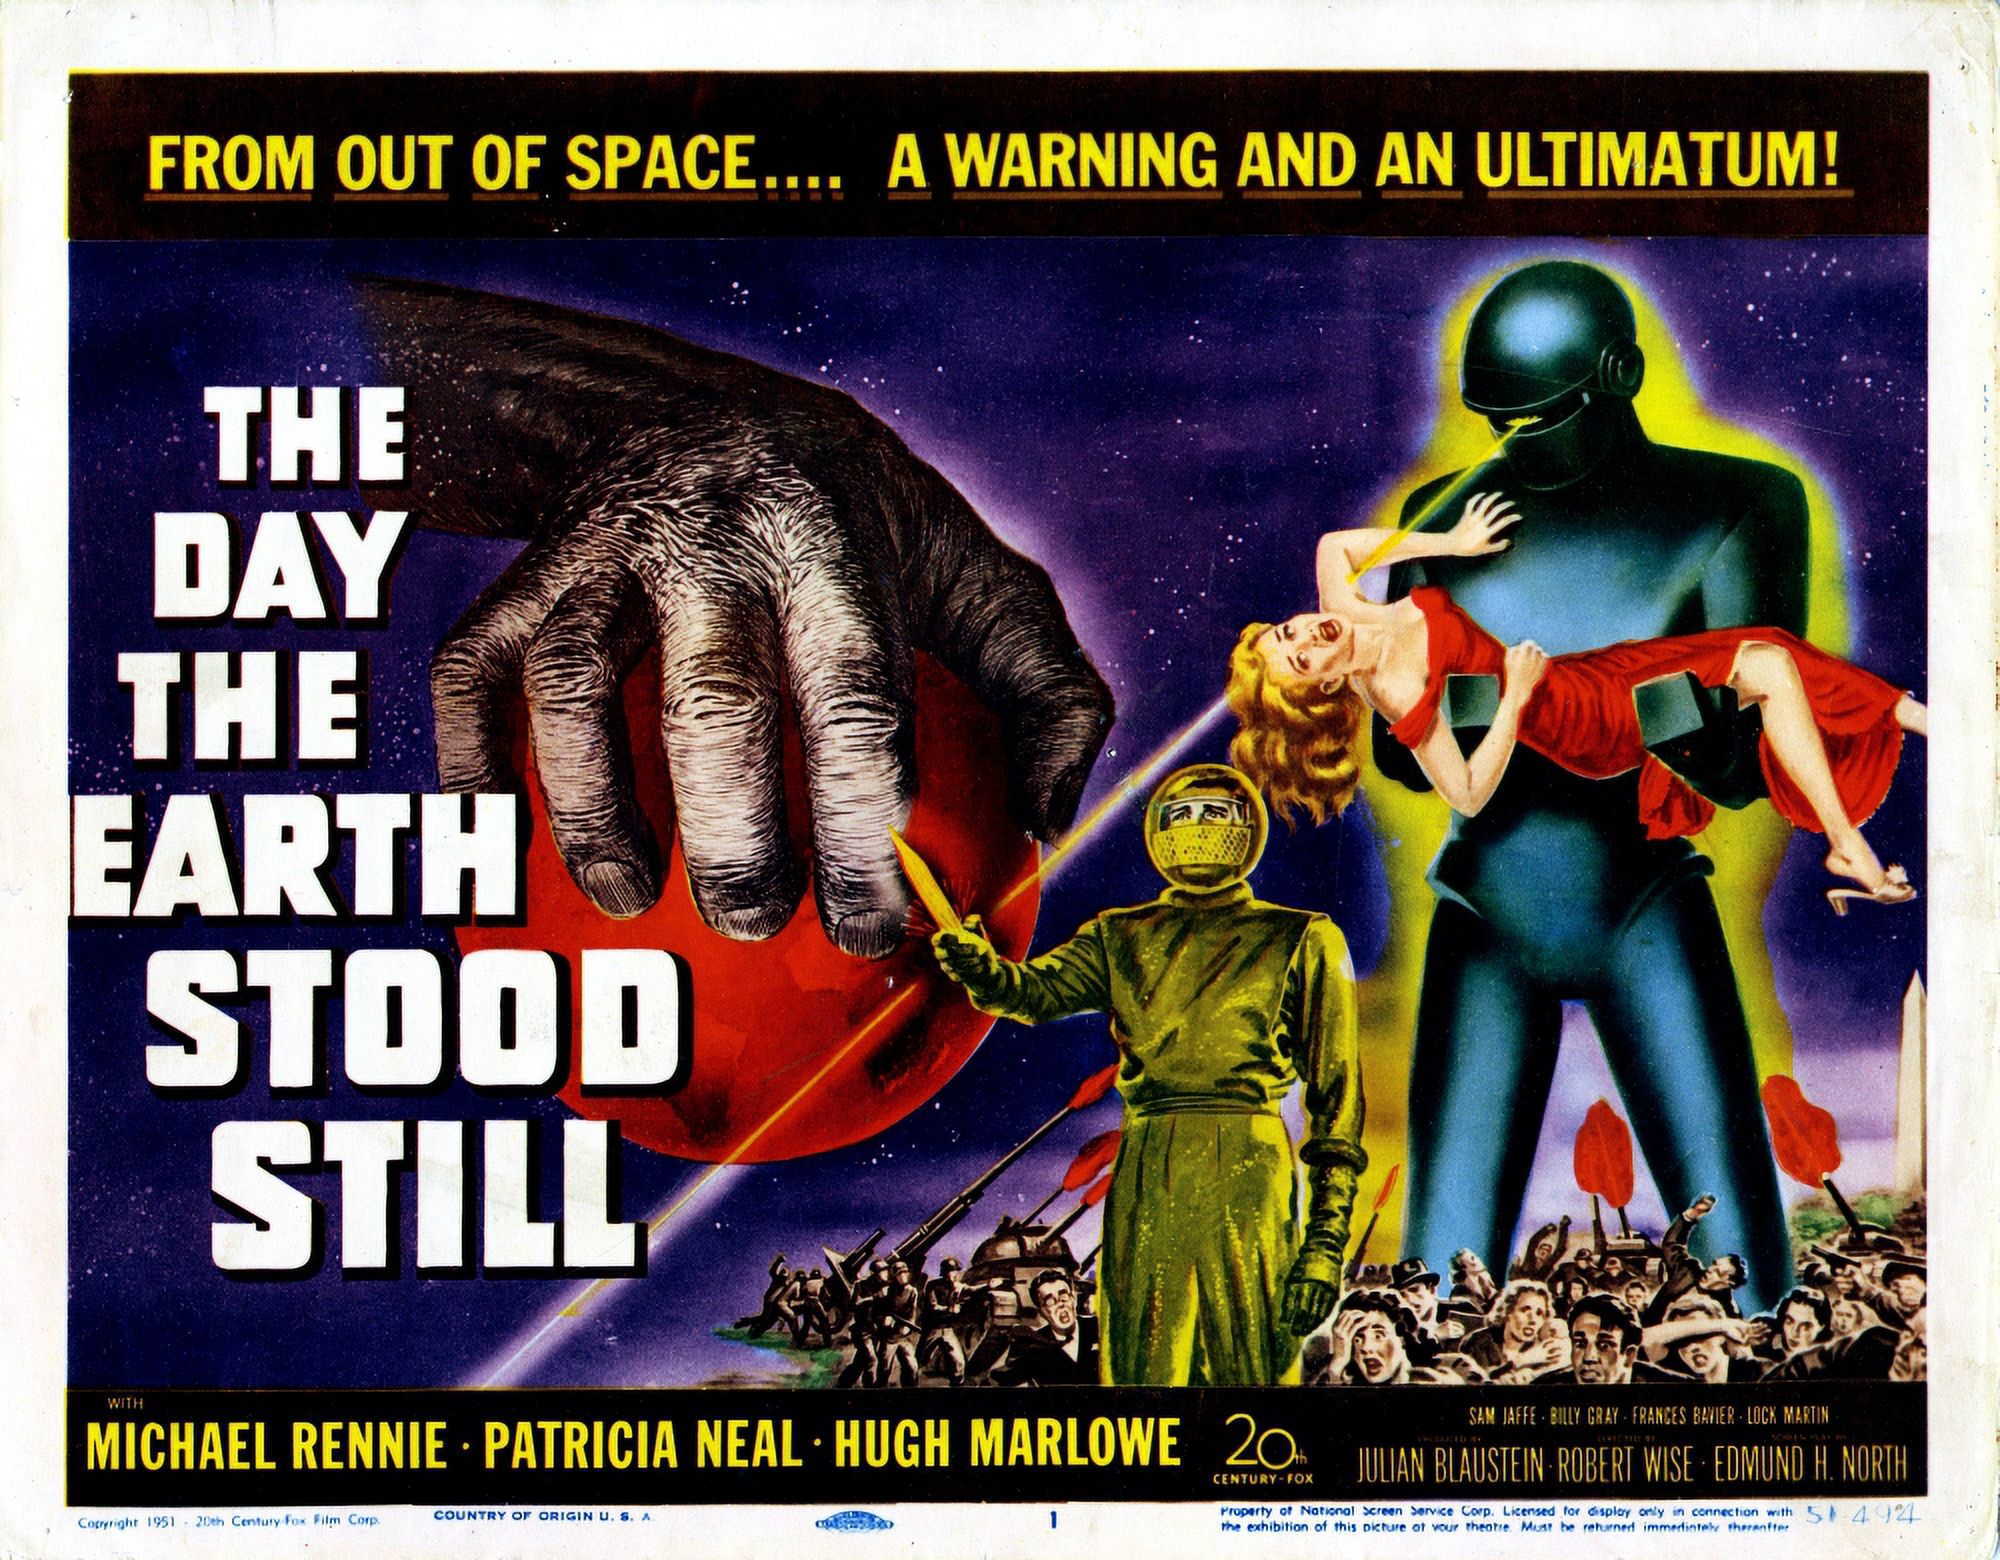 The Day The Earth Stood Still Photo Print (20 x 16) - image 1 of 1